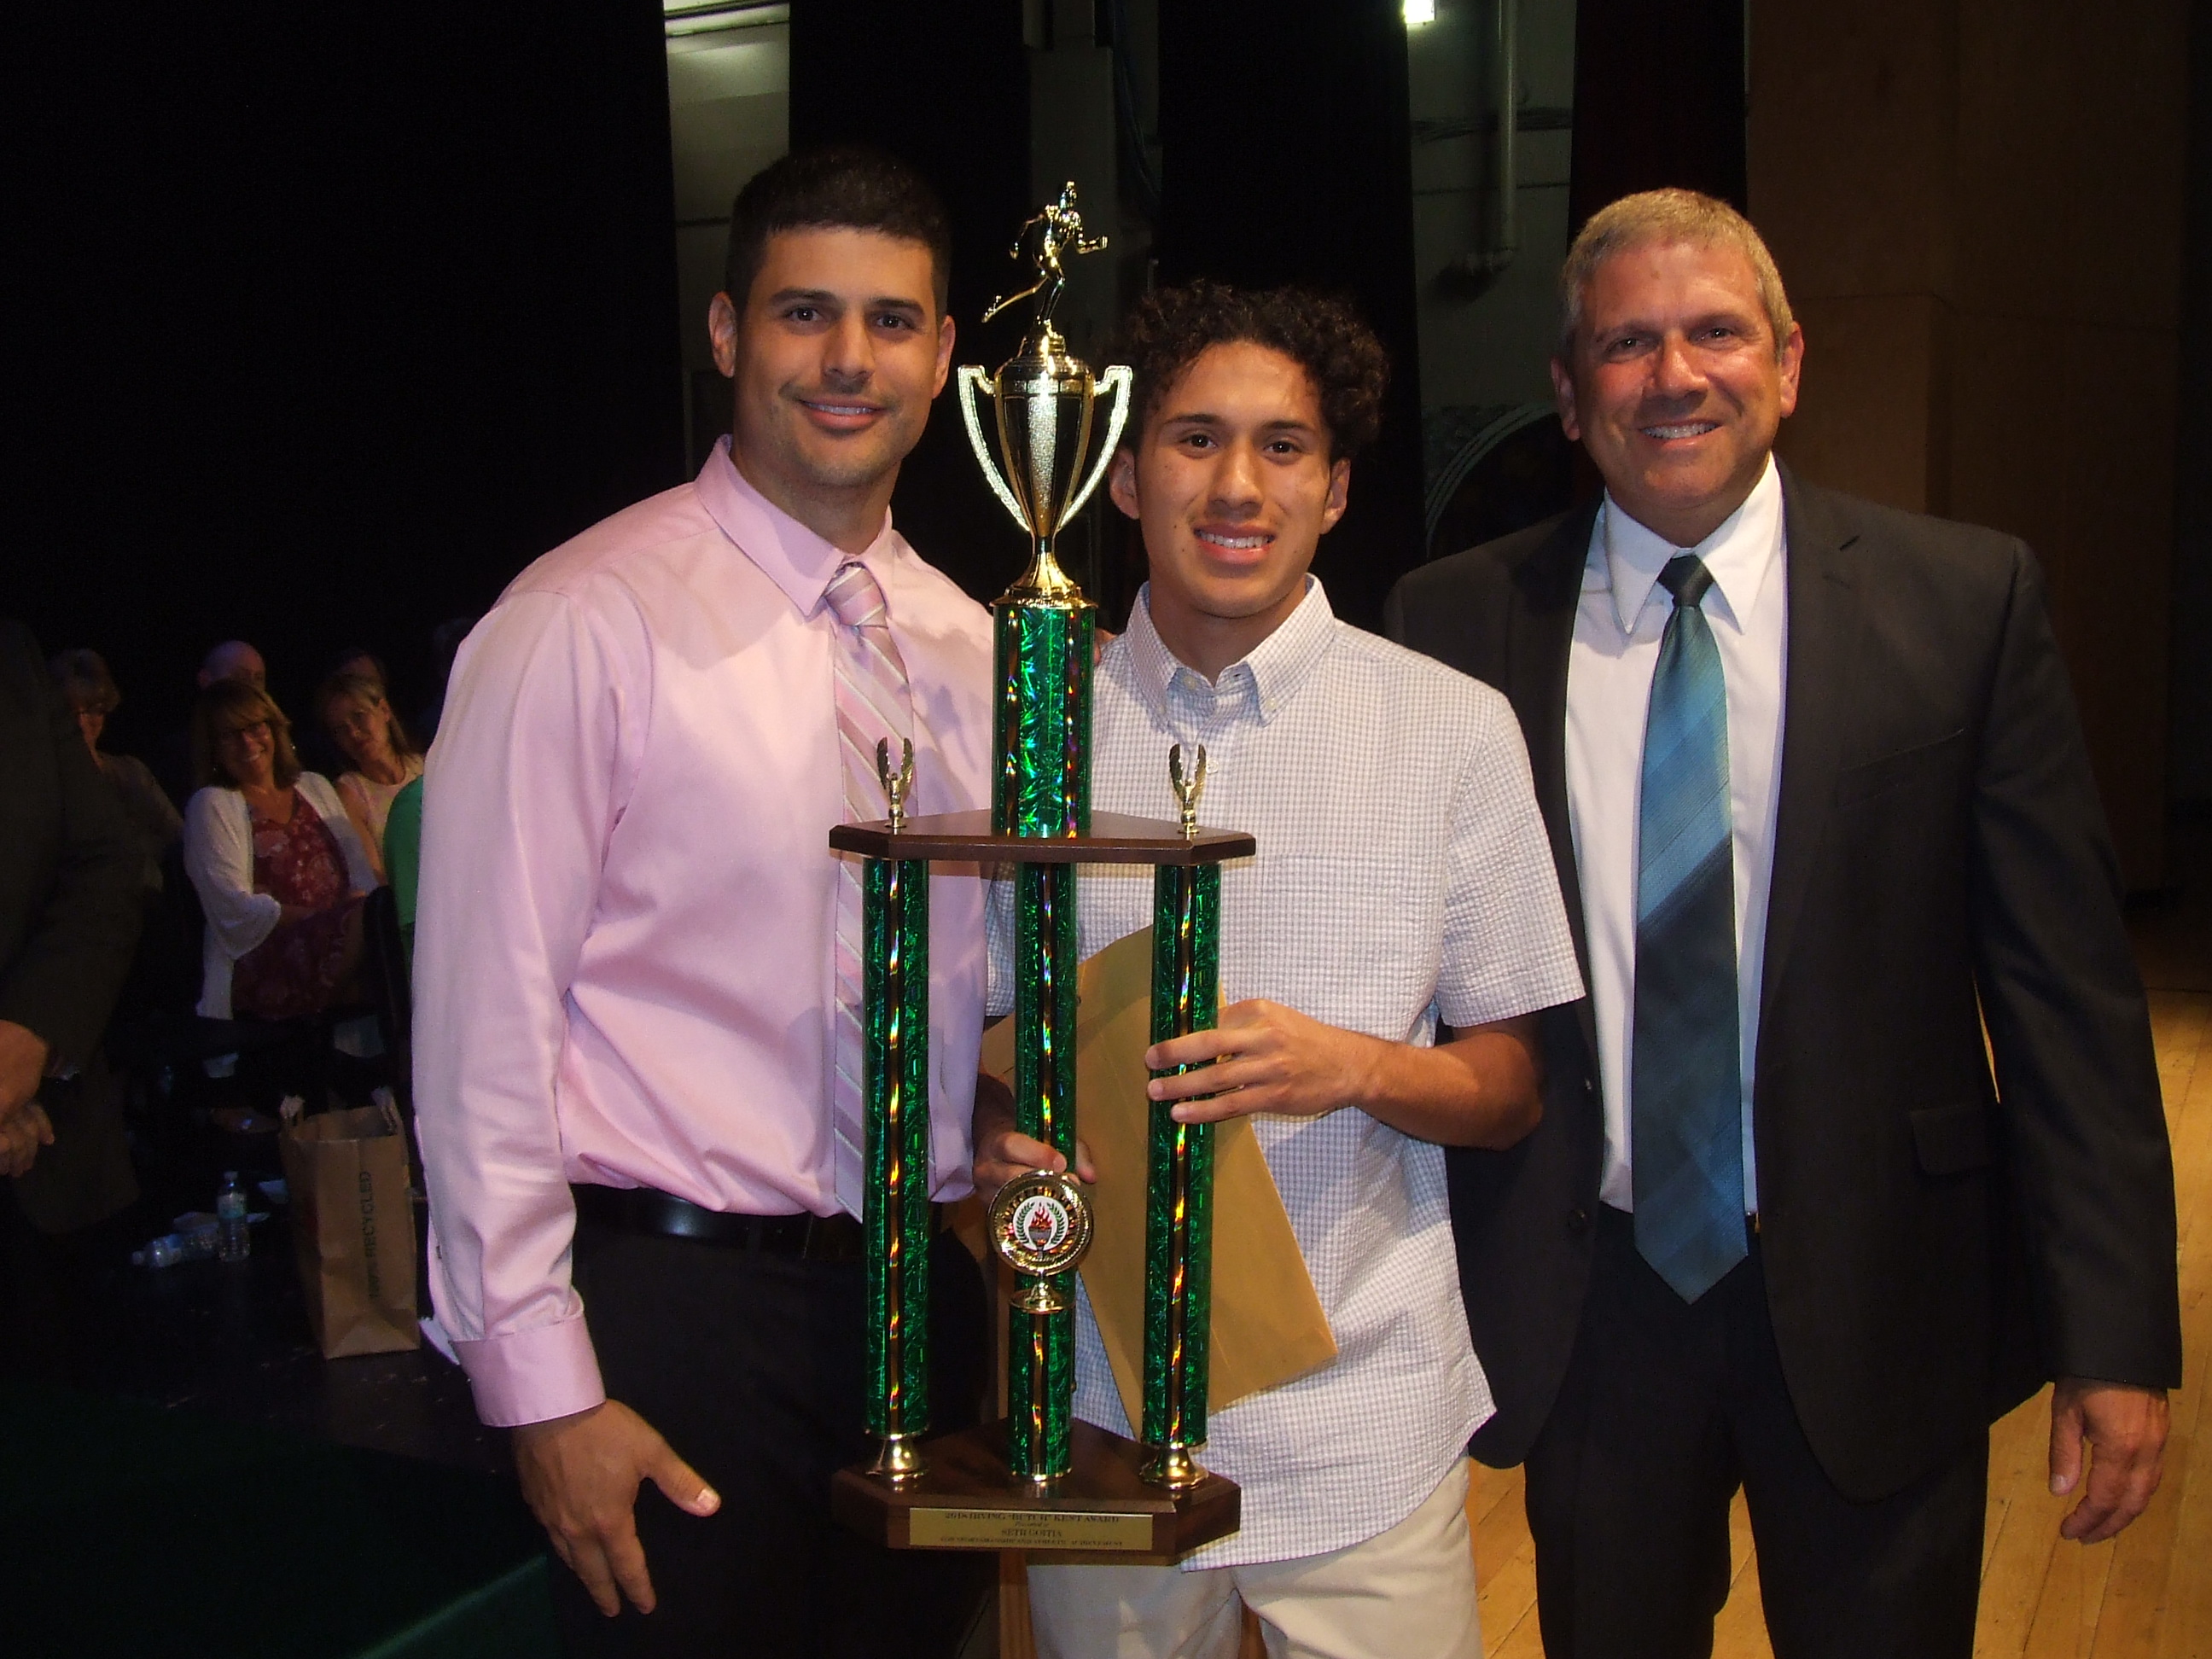 Seth Goitia with Coaches Mike Connolly and Dave Feuer